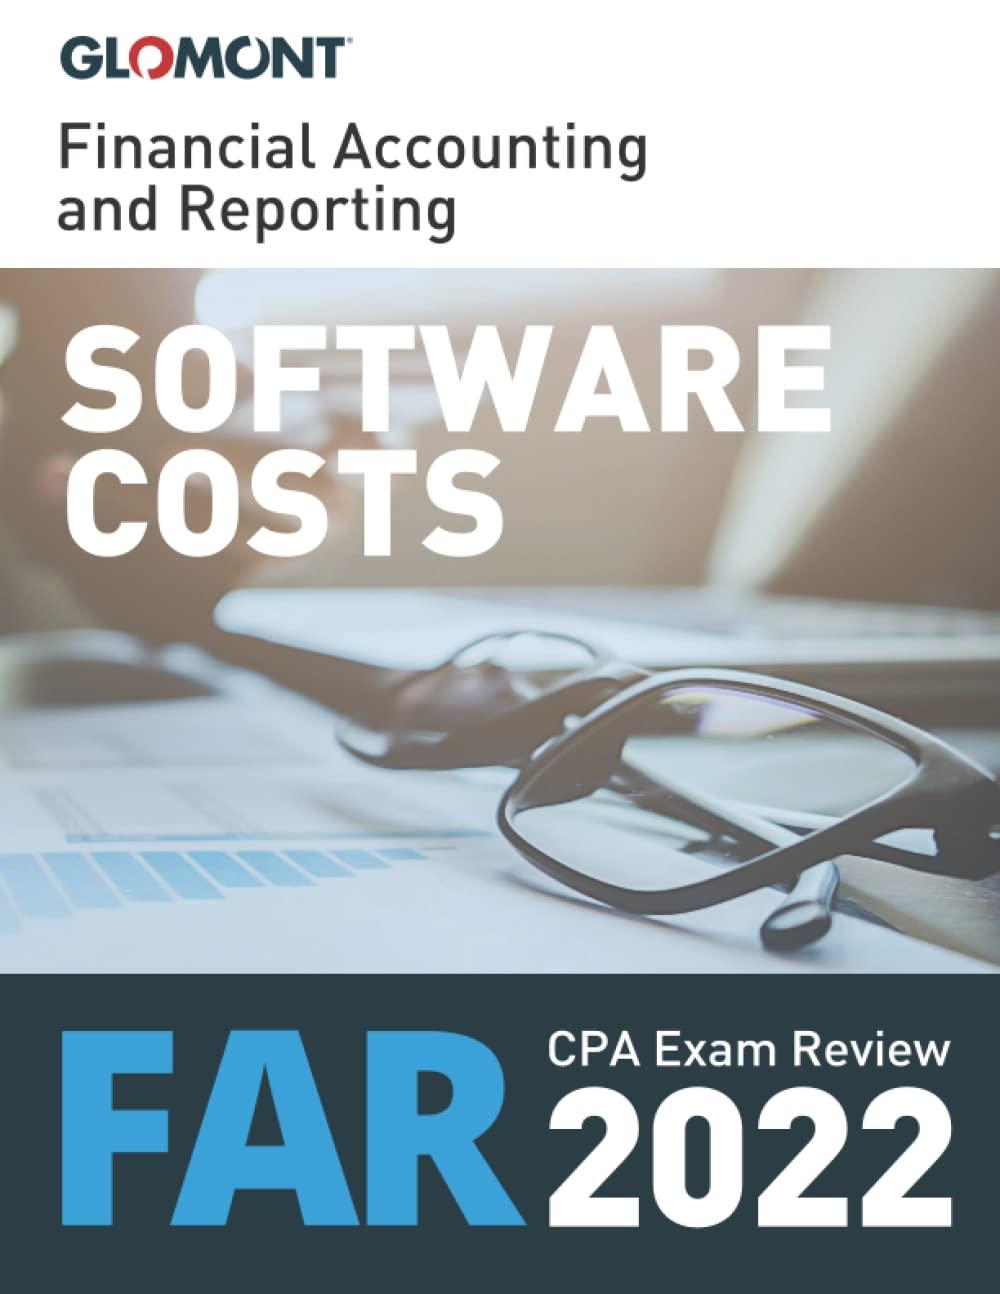 glomont cpa exam review financial accounting and reporting software costs 2022nd edition glomont 0999358154,